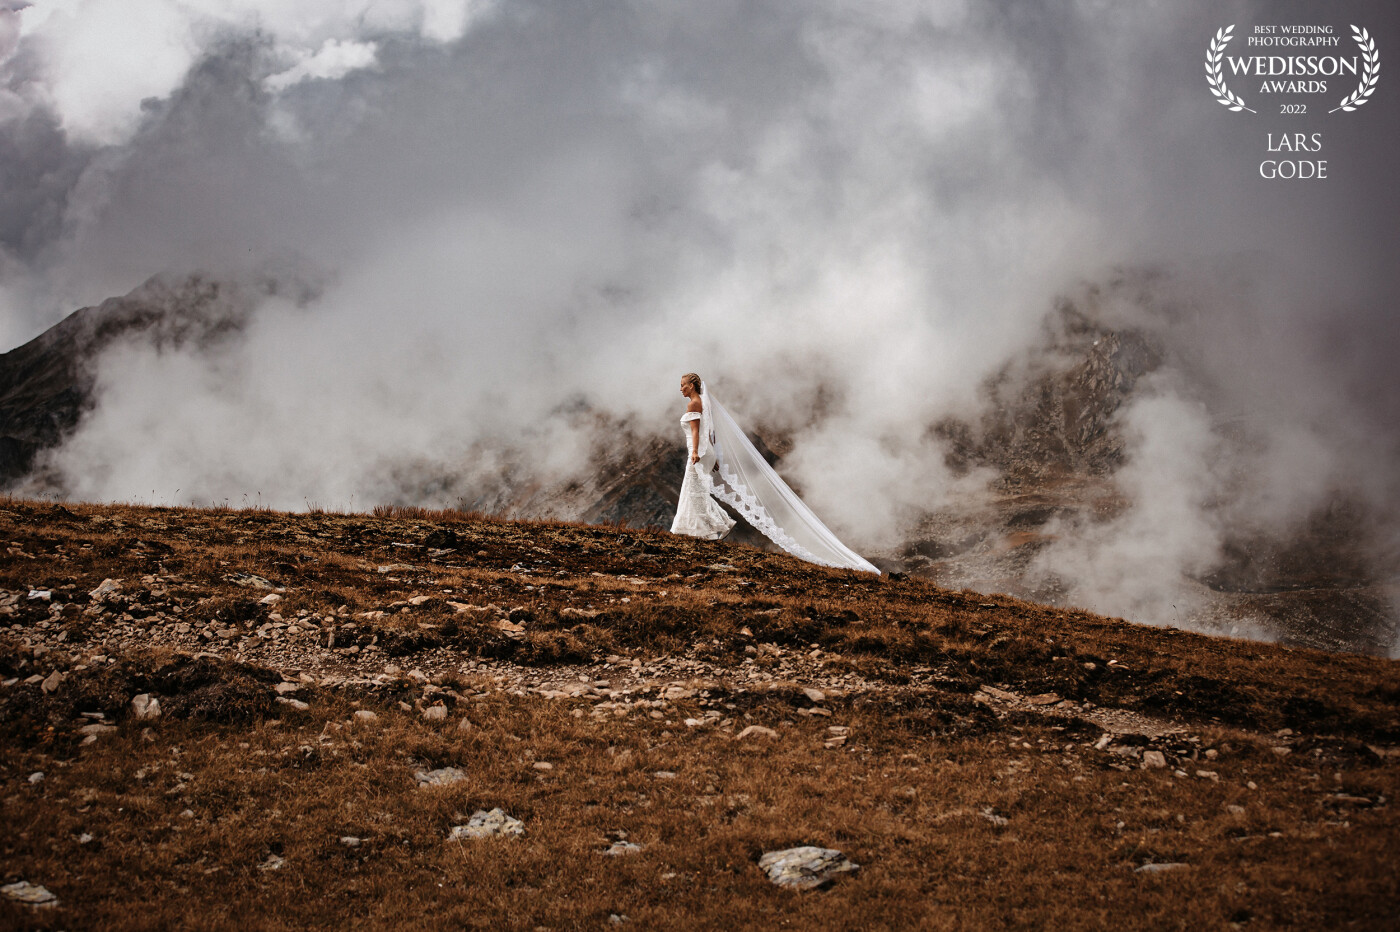 At least for me as a wedding photographer, there is hardly anything more beautiful than the contrast between a graceful bride and a rugged location.